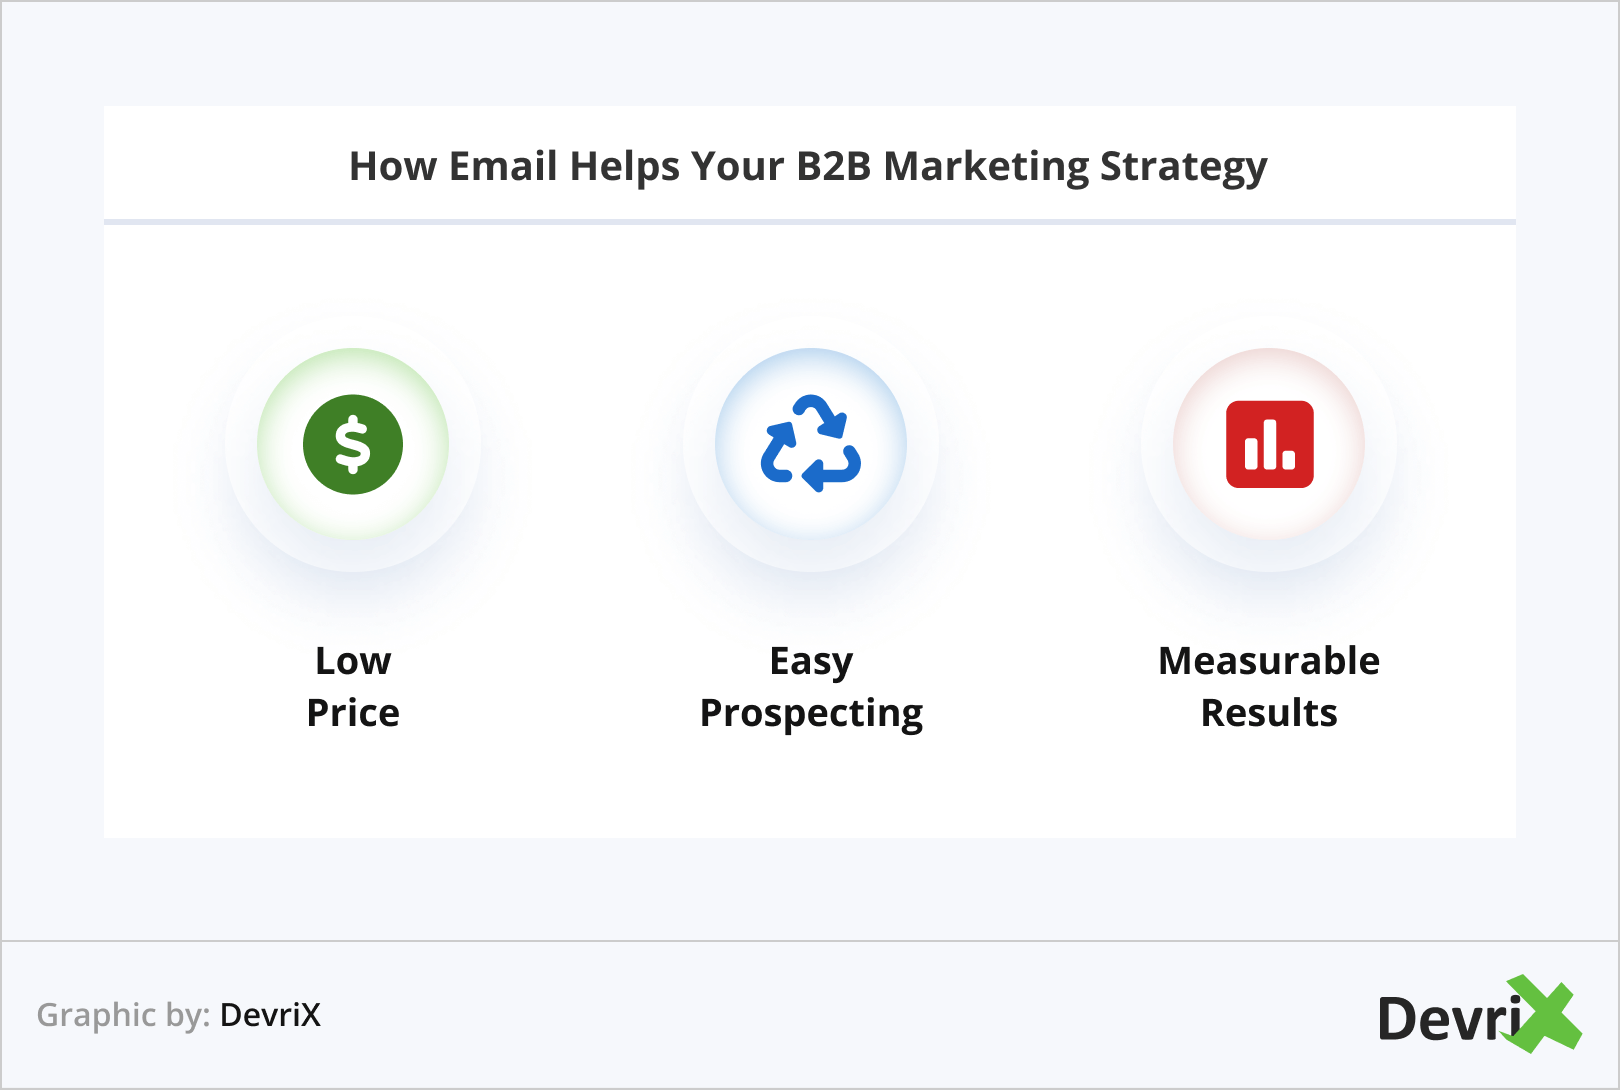 How Email Helps Your B2B Marketing Strategy